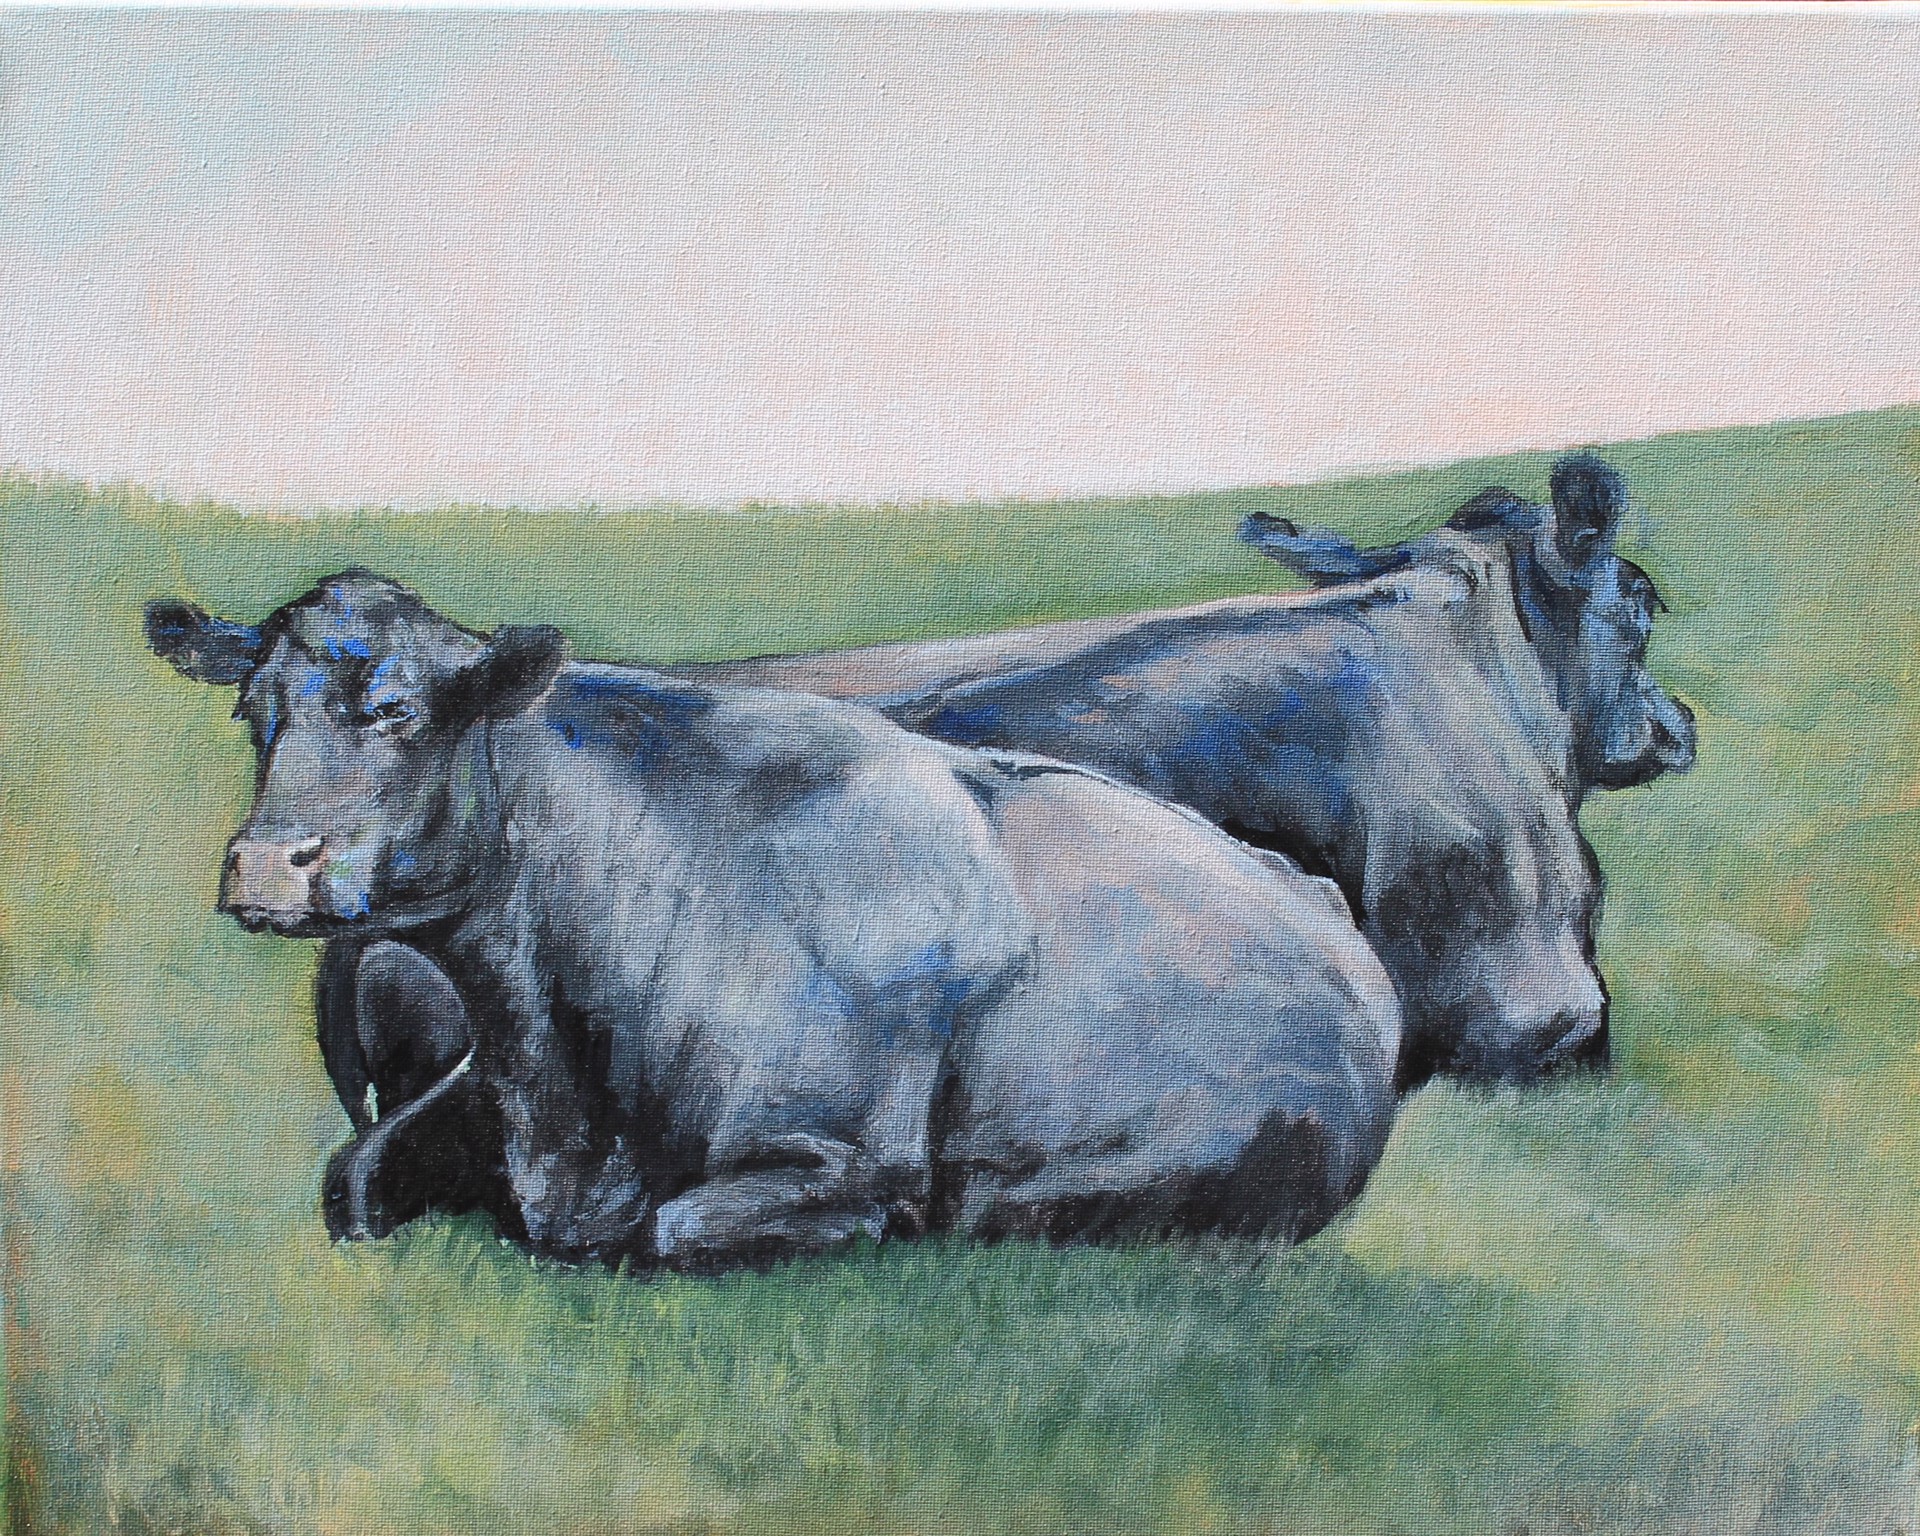 Two Cows Lazing by Douglas H. Caves Sr.